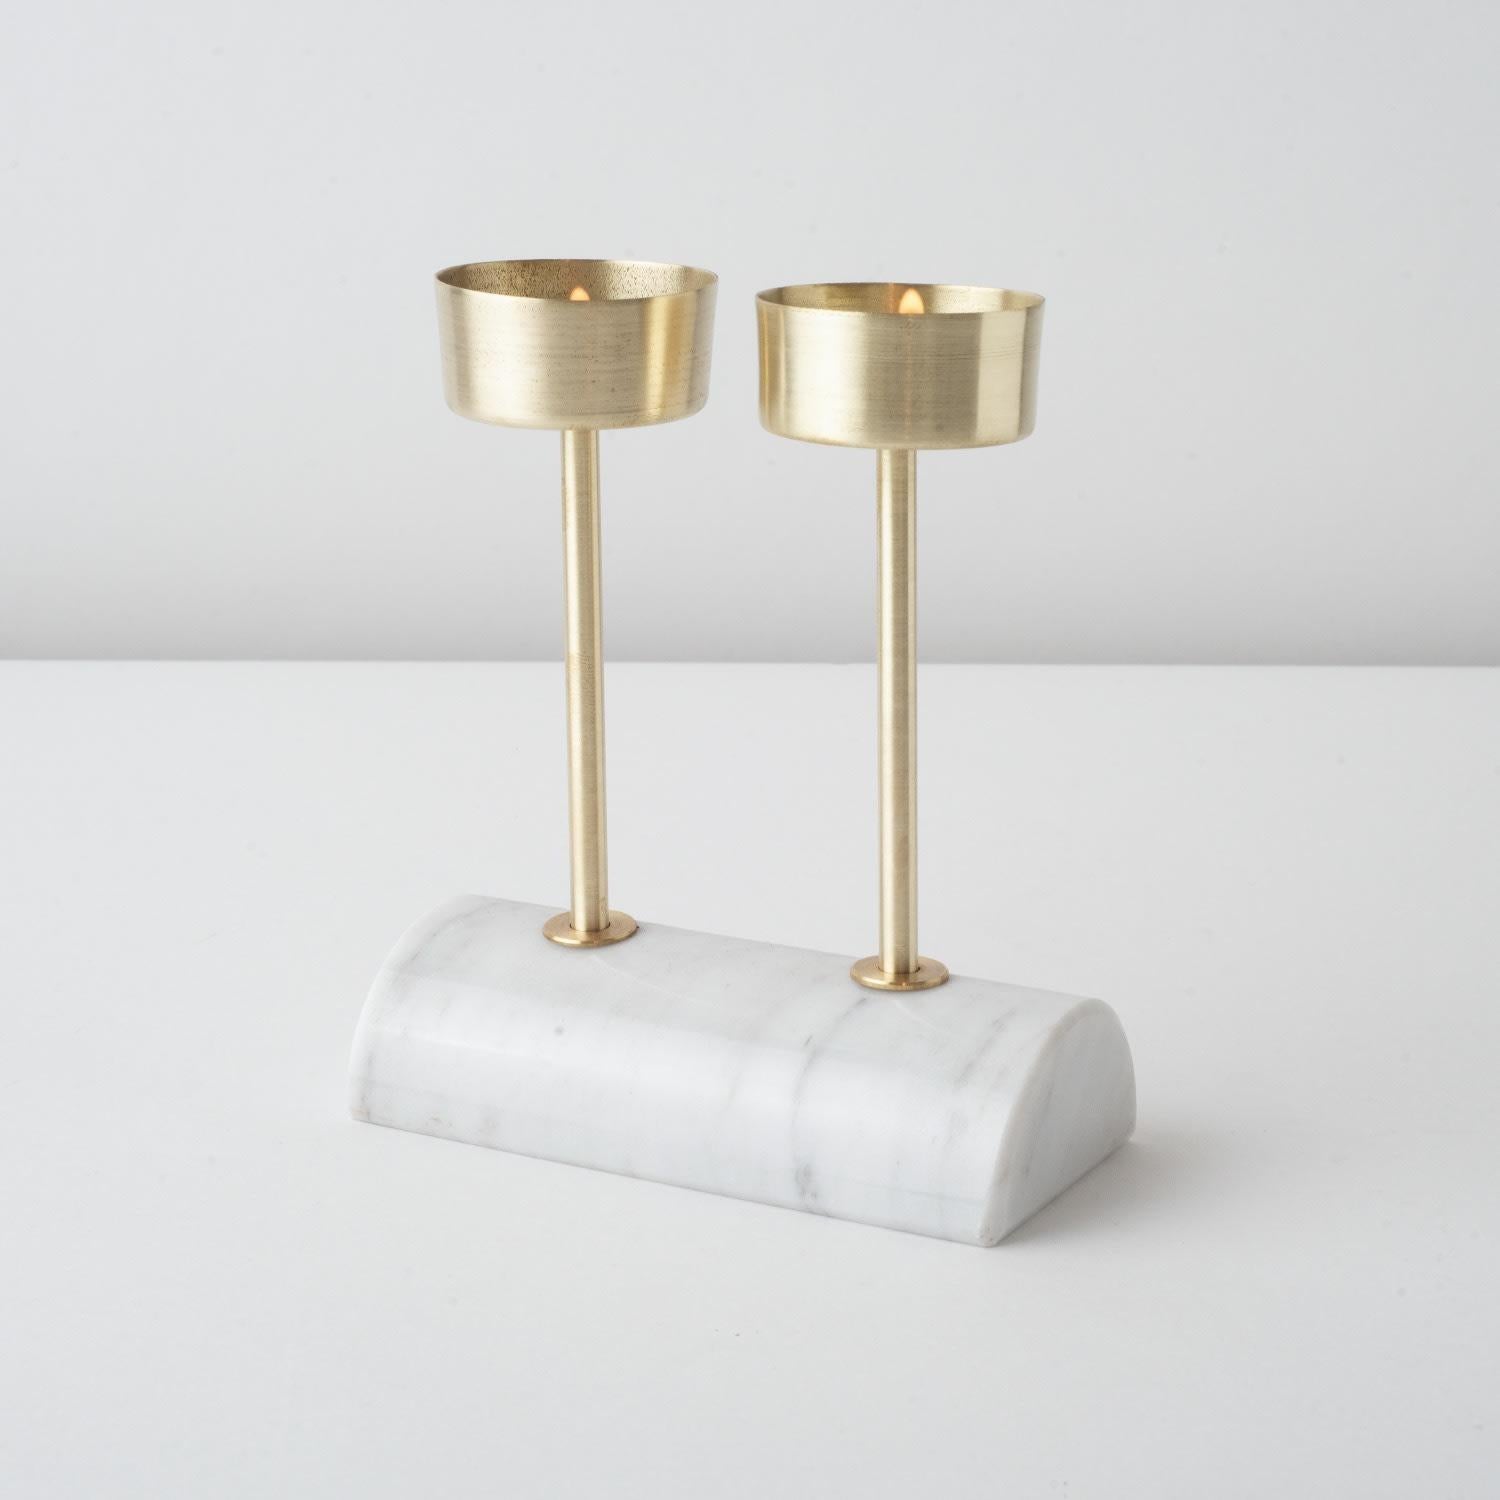 Yunta Travertine Marble & Brass Candle Holders For Sale 3